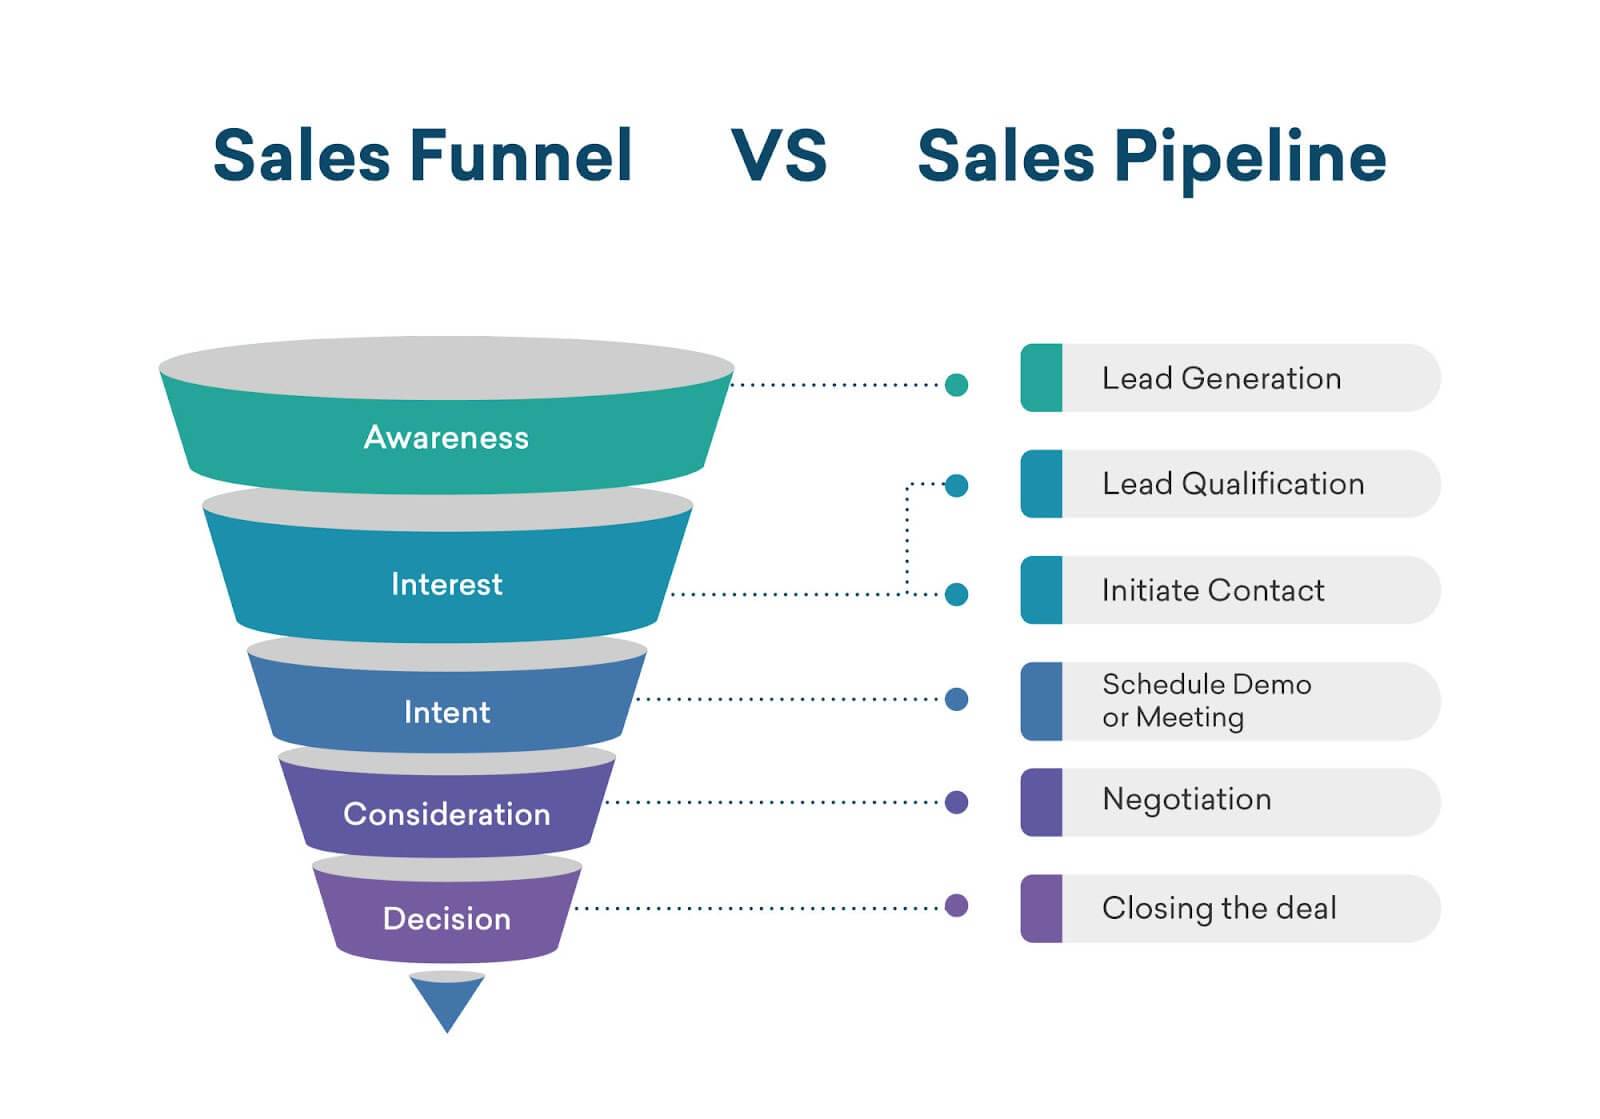 2. Focus on the best leads to maximize your sales potential